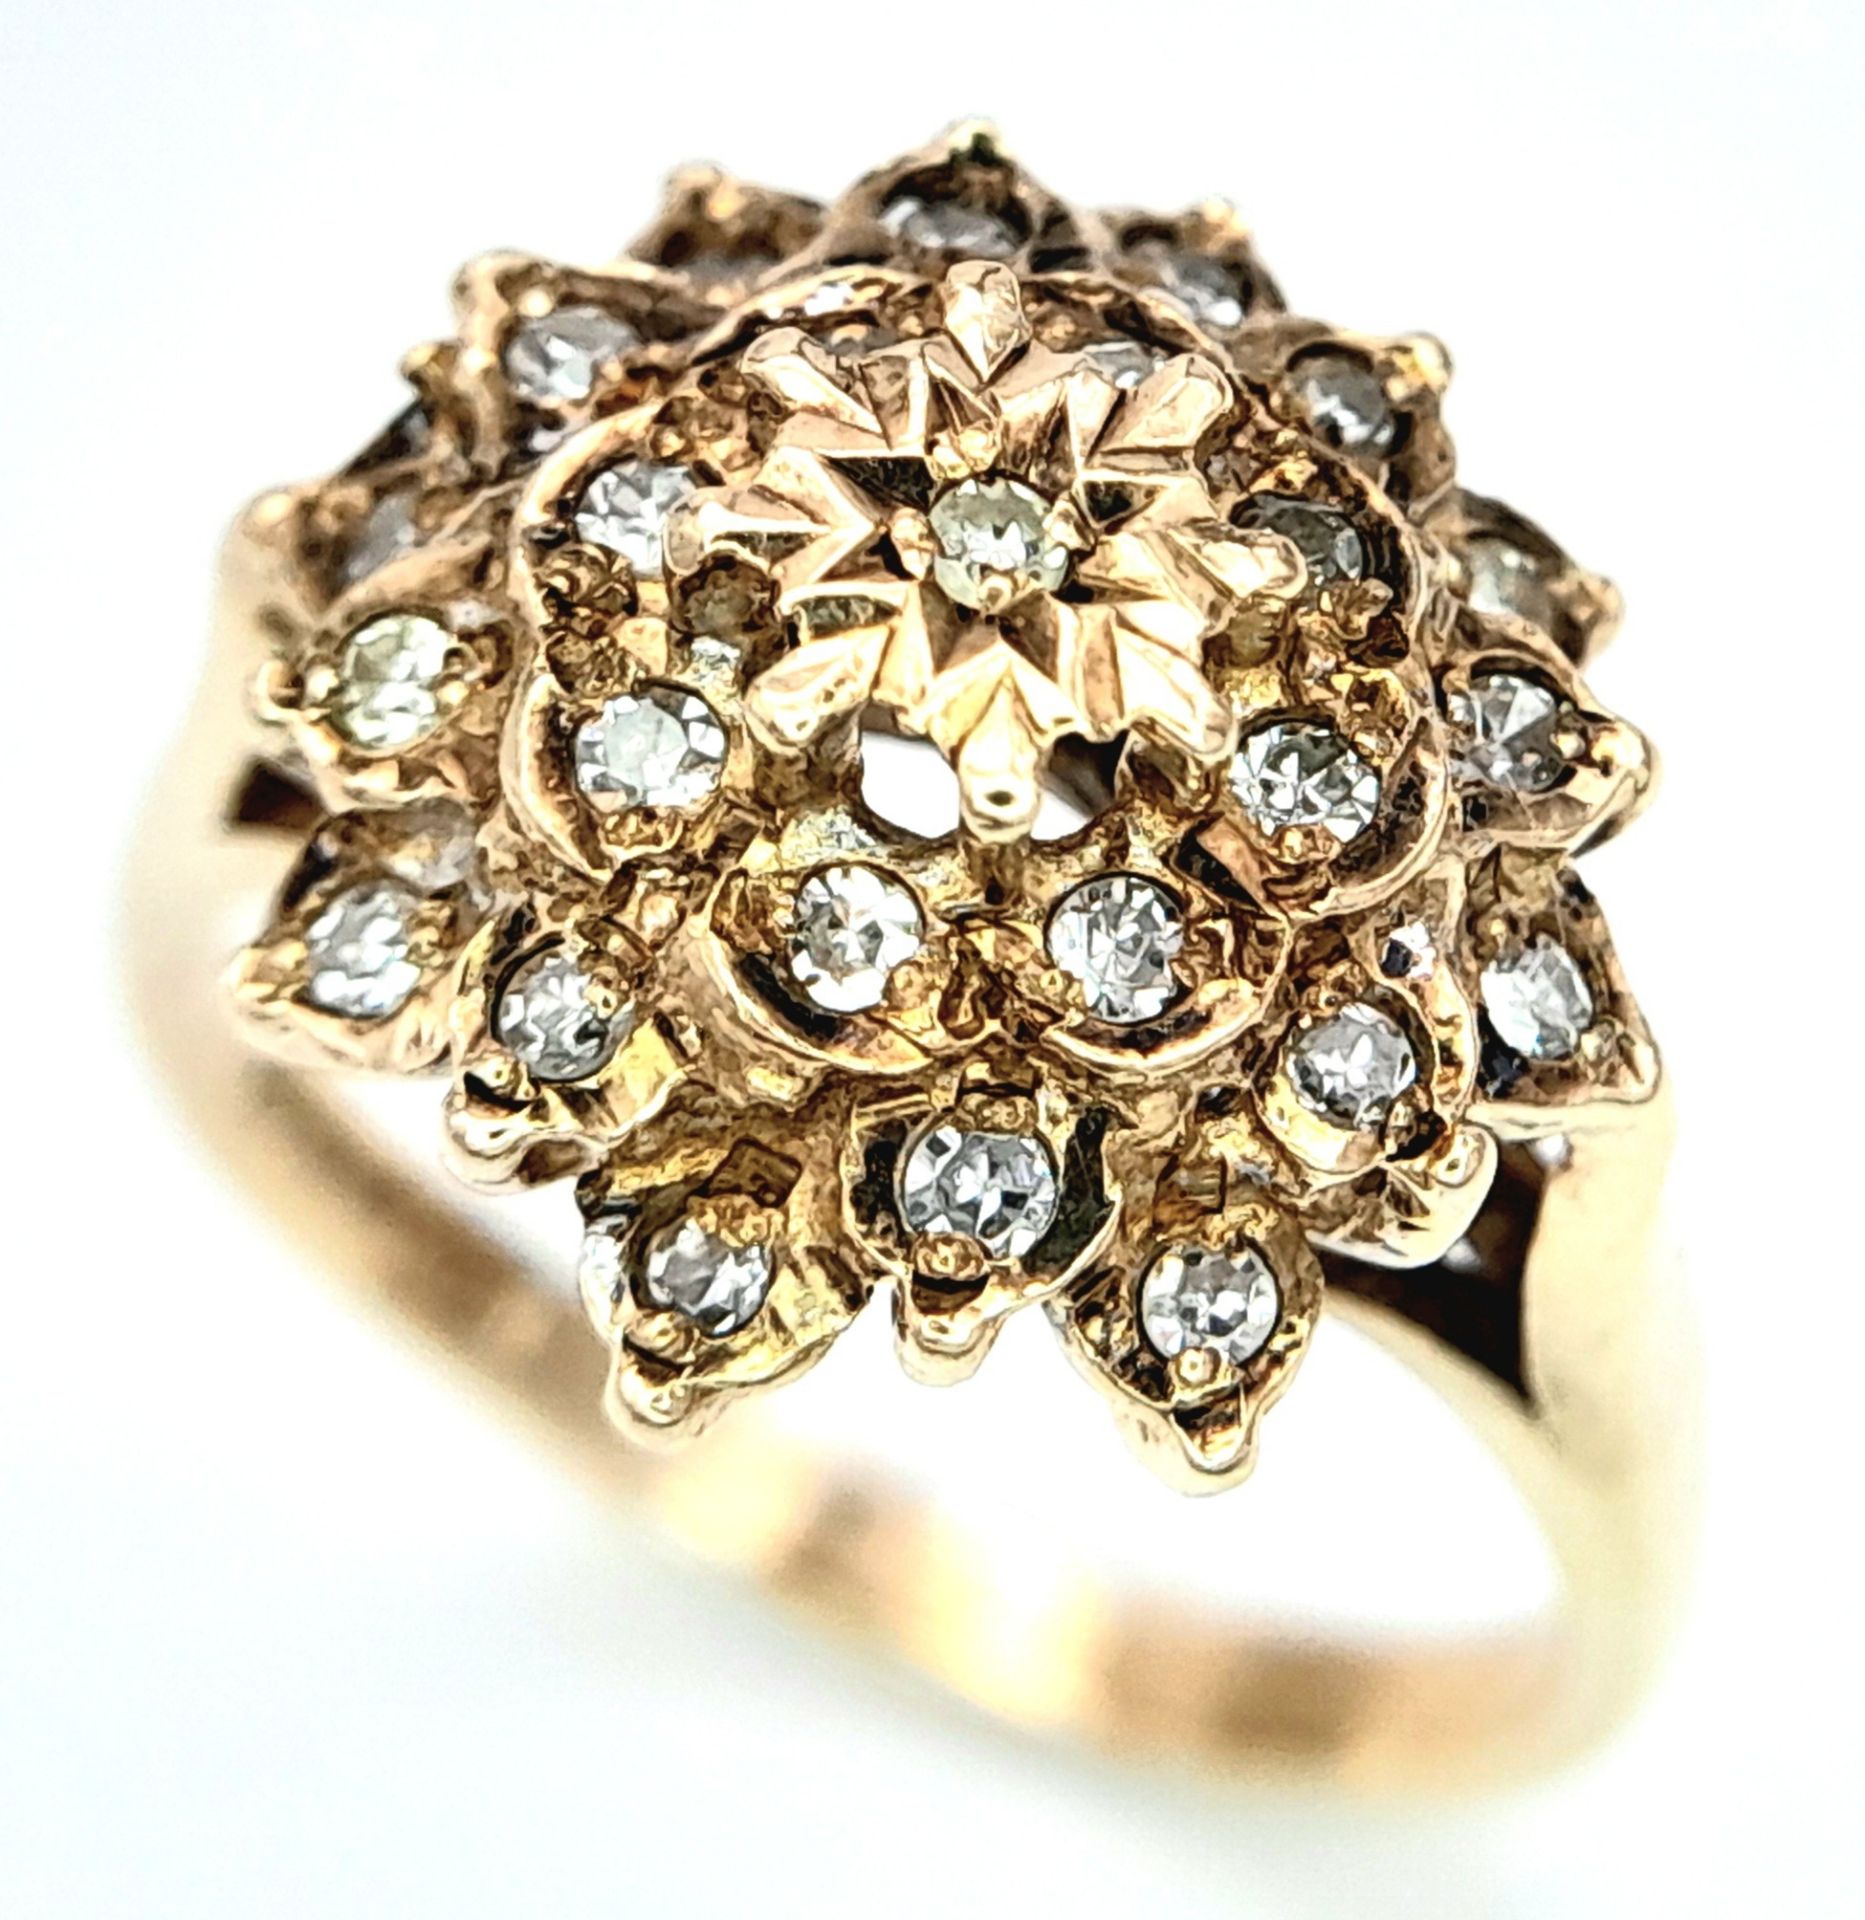 A 9K YELLOW GOLD DIAMOND CLUSTER RING. Size J, 2.8g total weight. Ref: SC 8032